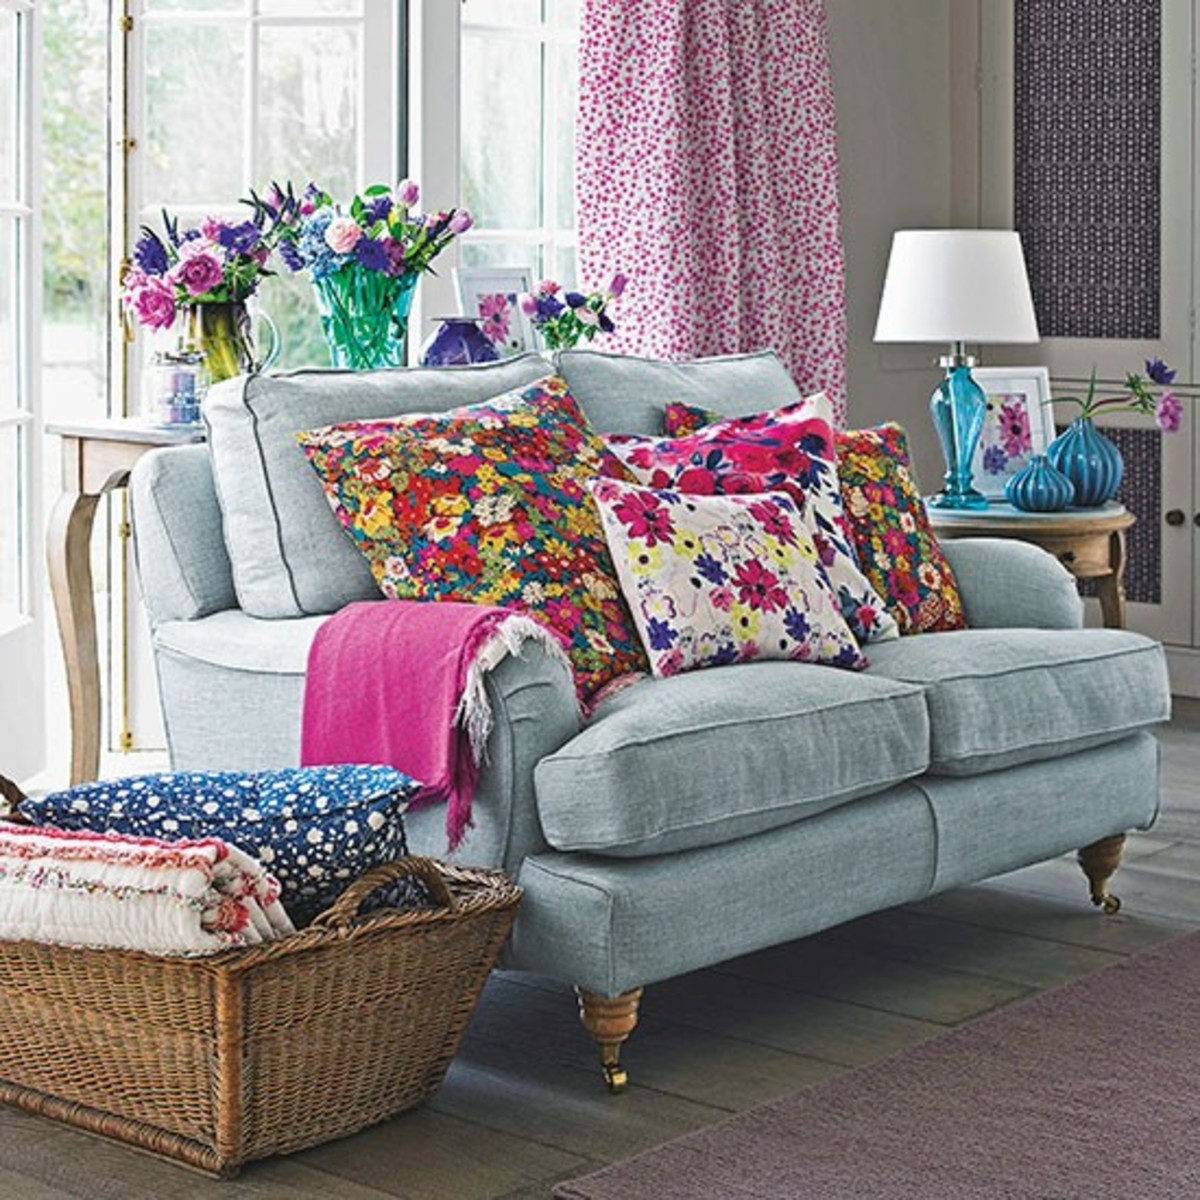 The floral theme ties the colored items in the room together.